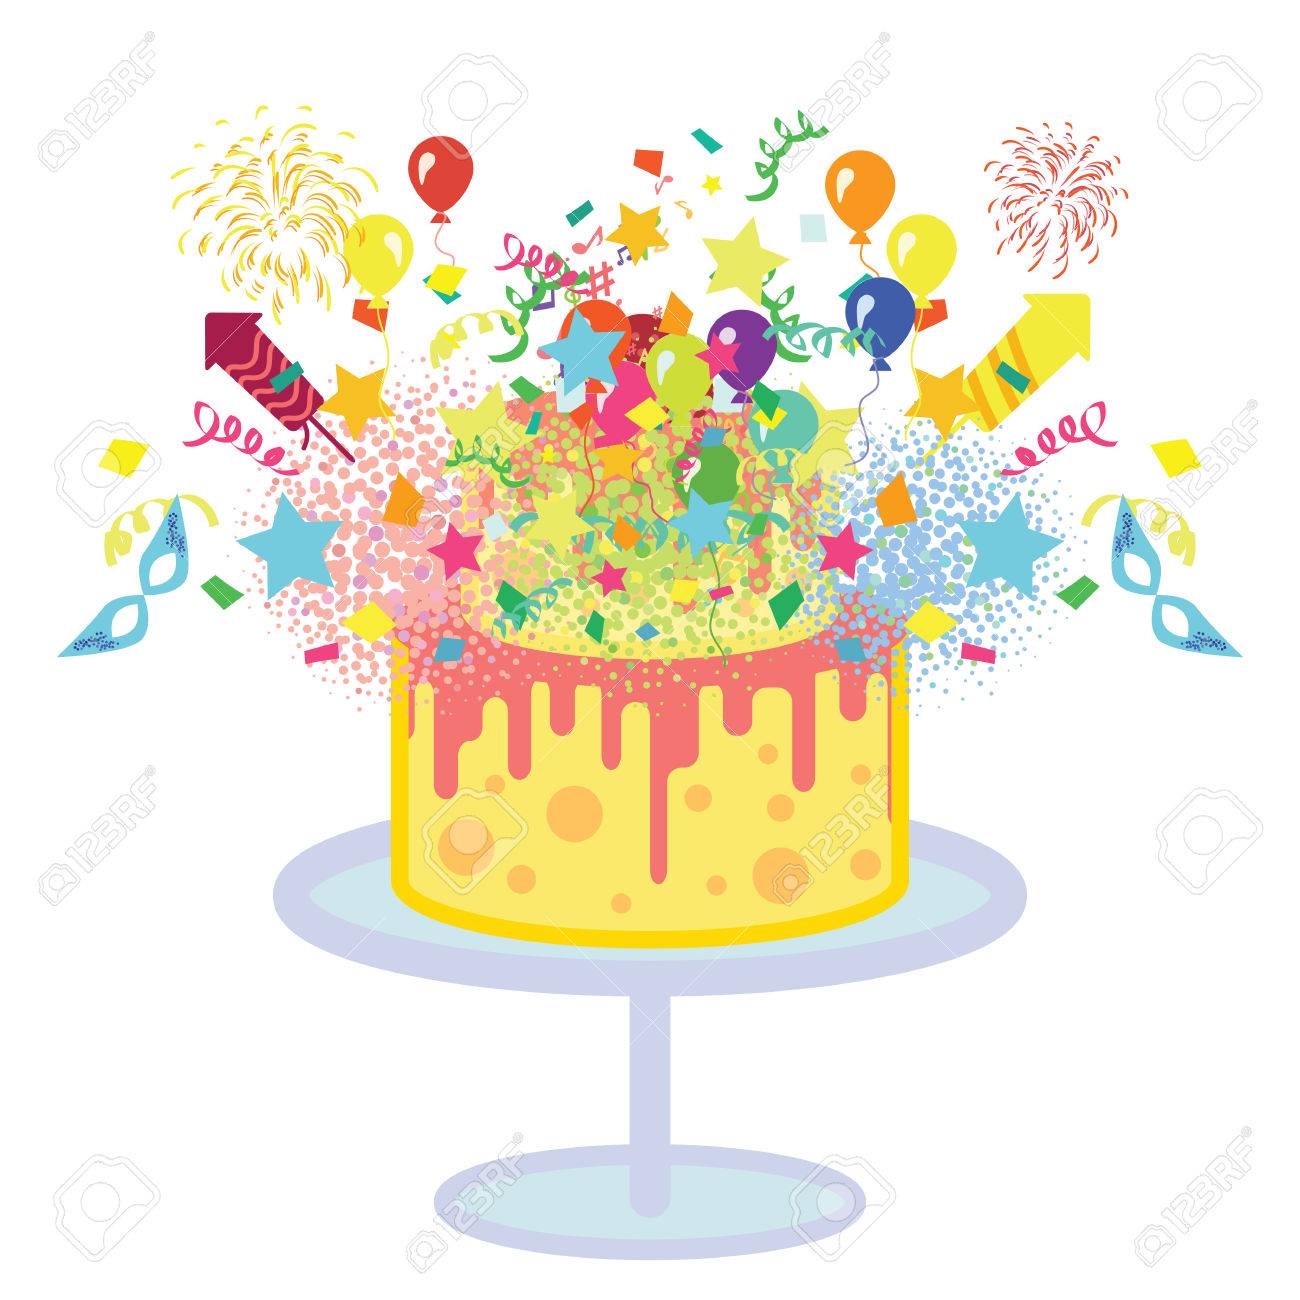 Animated birthday cake with balloons and confetti